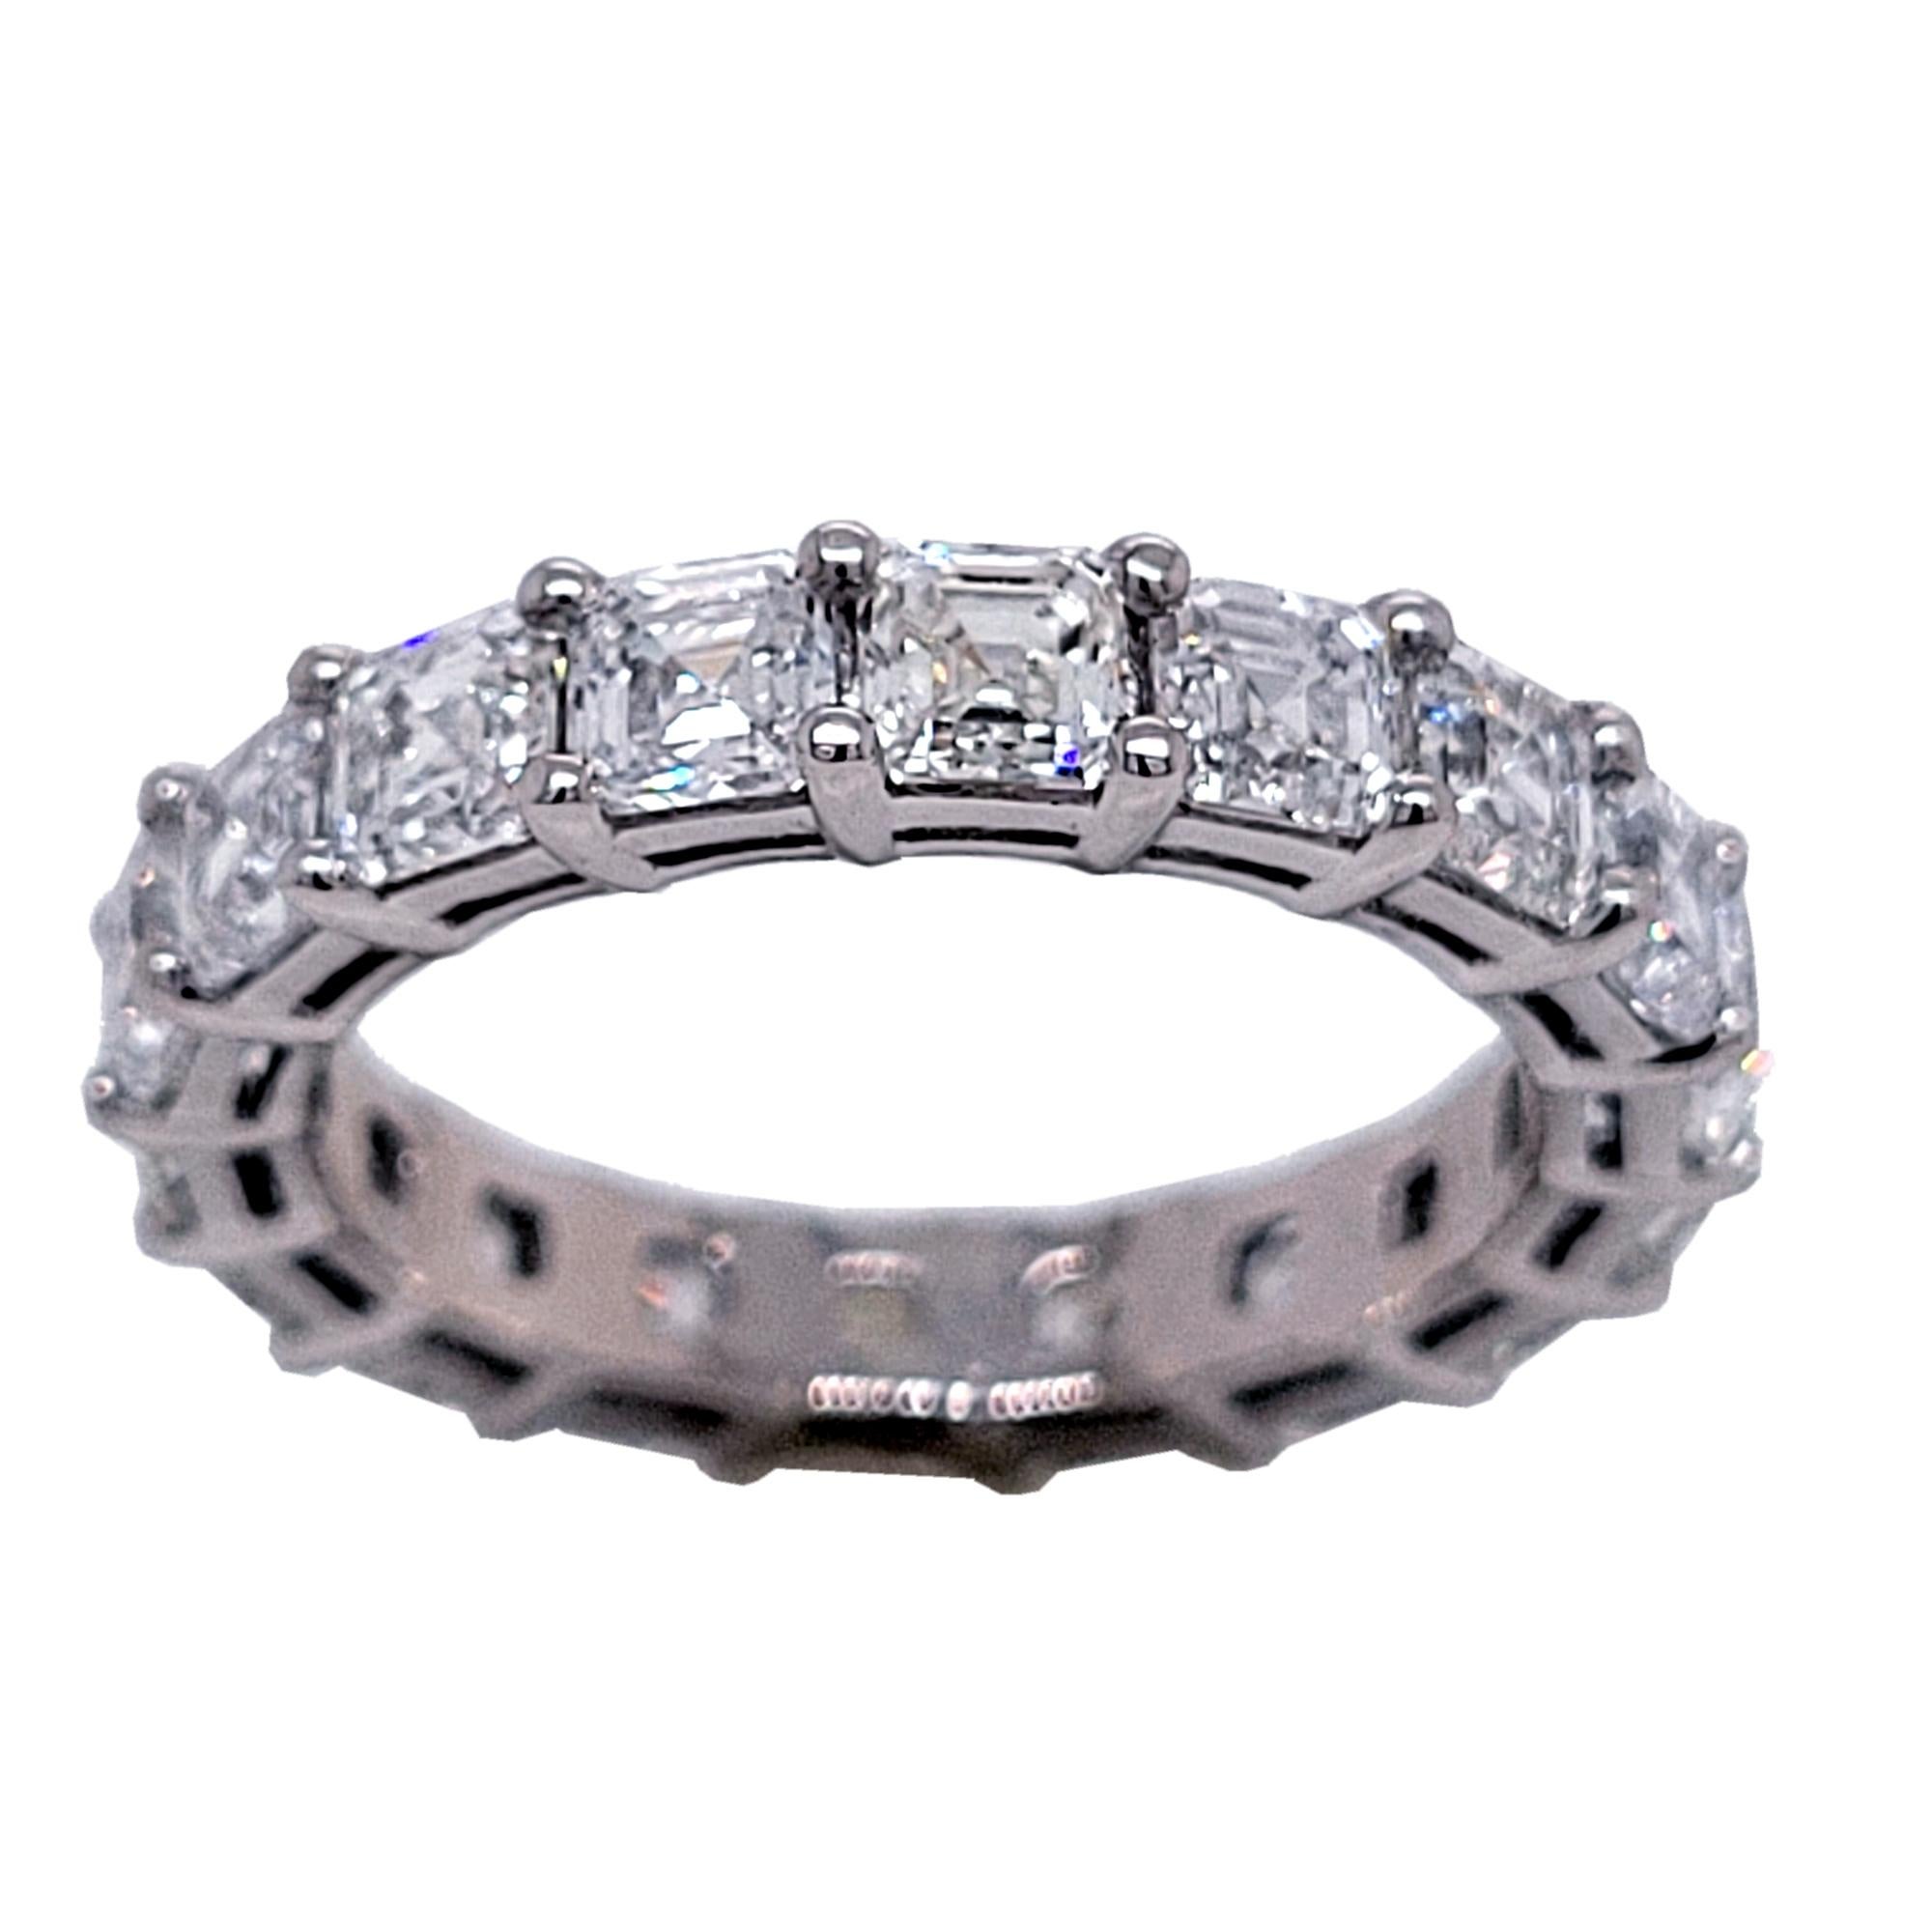 This beautiful Eternity Ring is made of Platinum showcasing 18 perfectly matched 1/4 Ct (VS/E-F) Asscher Cut 'Square Emerald Cut' Diamond Set in Shared Prong Mode.
Total Weight of diamonds: 4.47 Ct Clarity: VS, Color: E-F
Total Weight of the Ring: